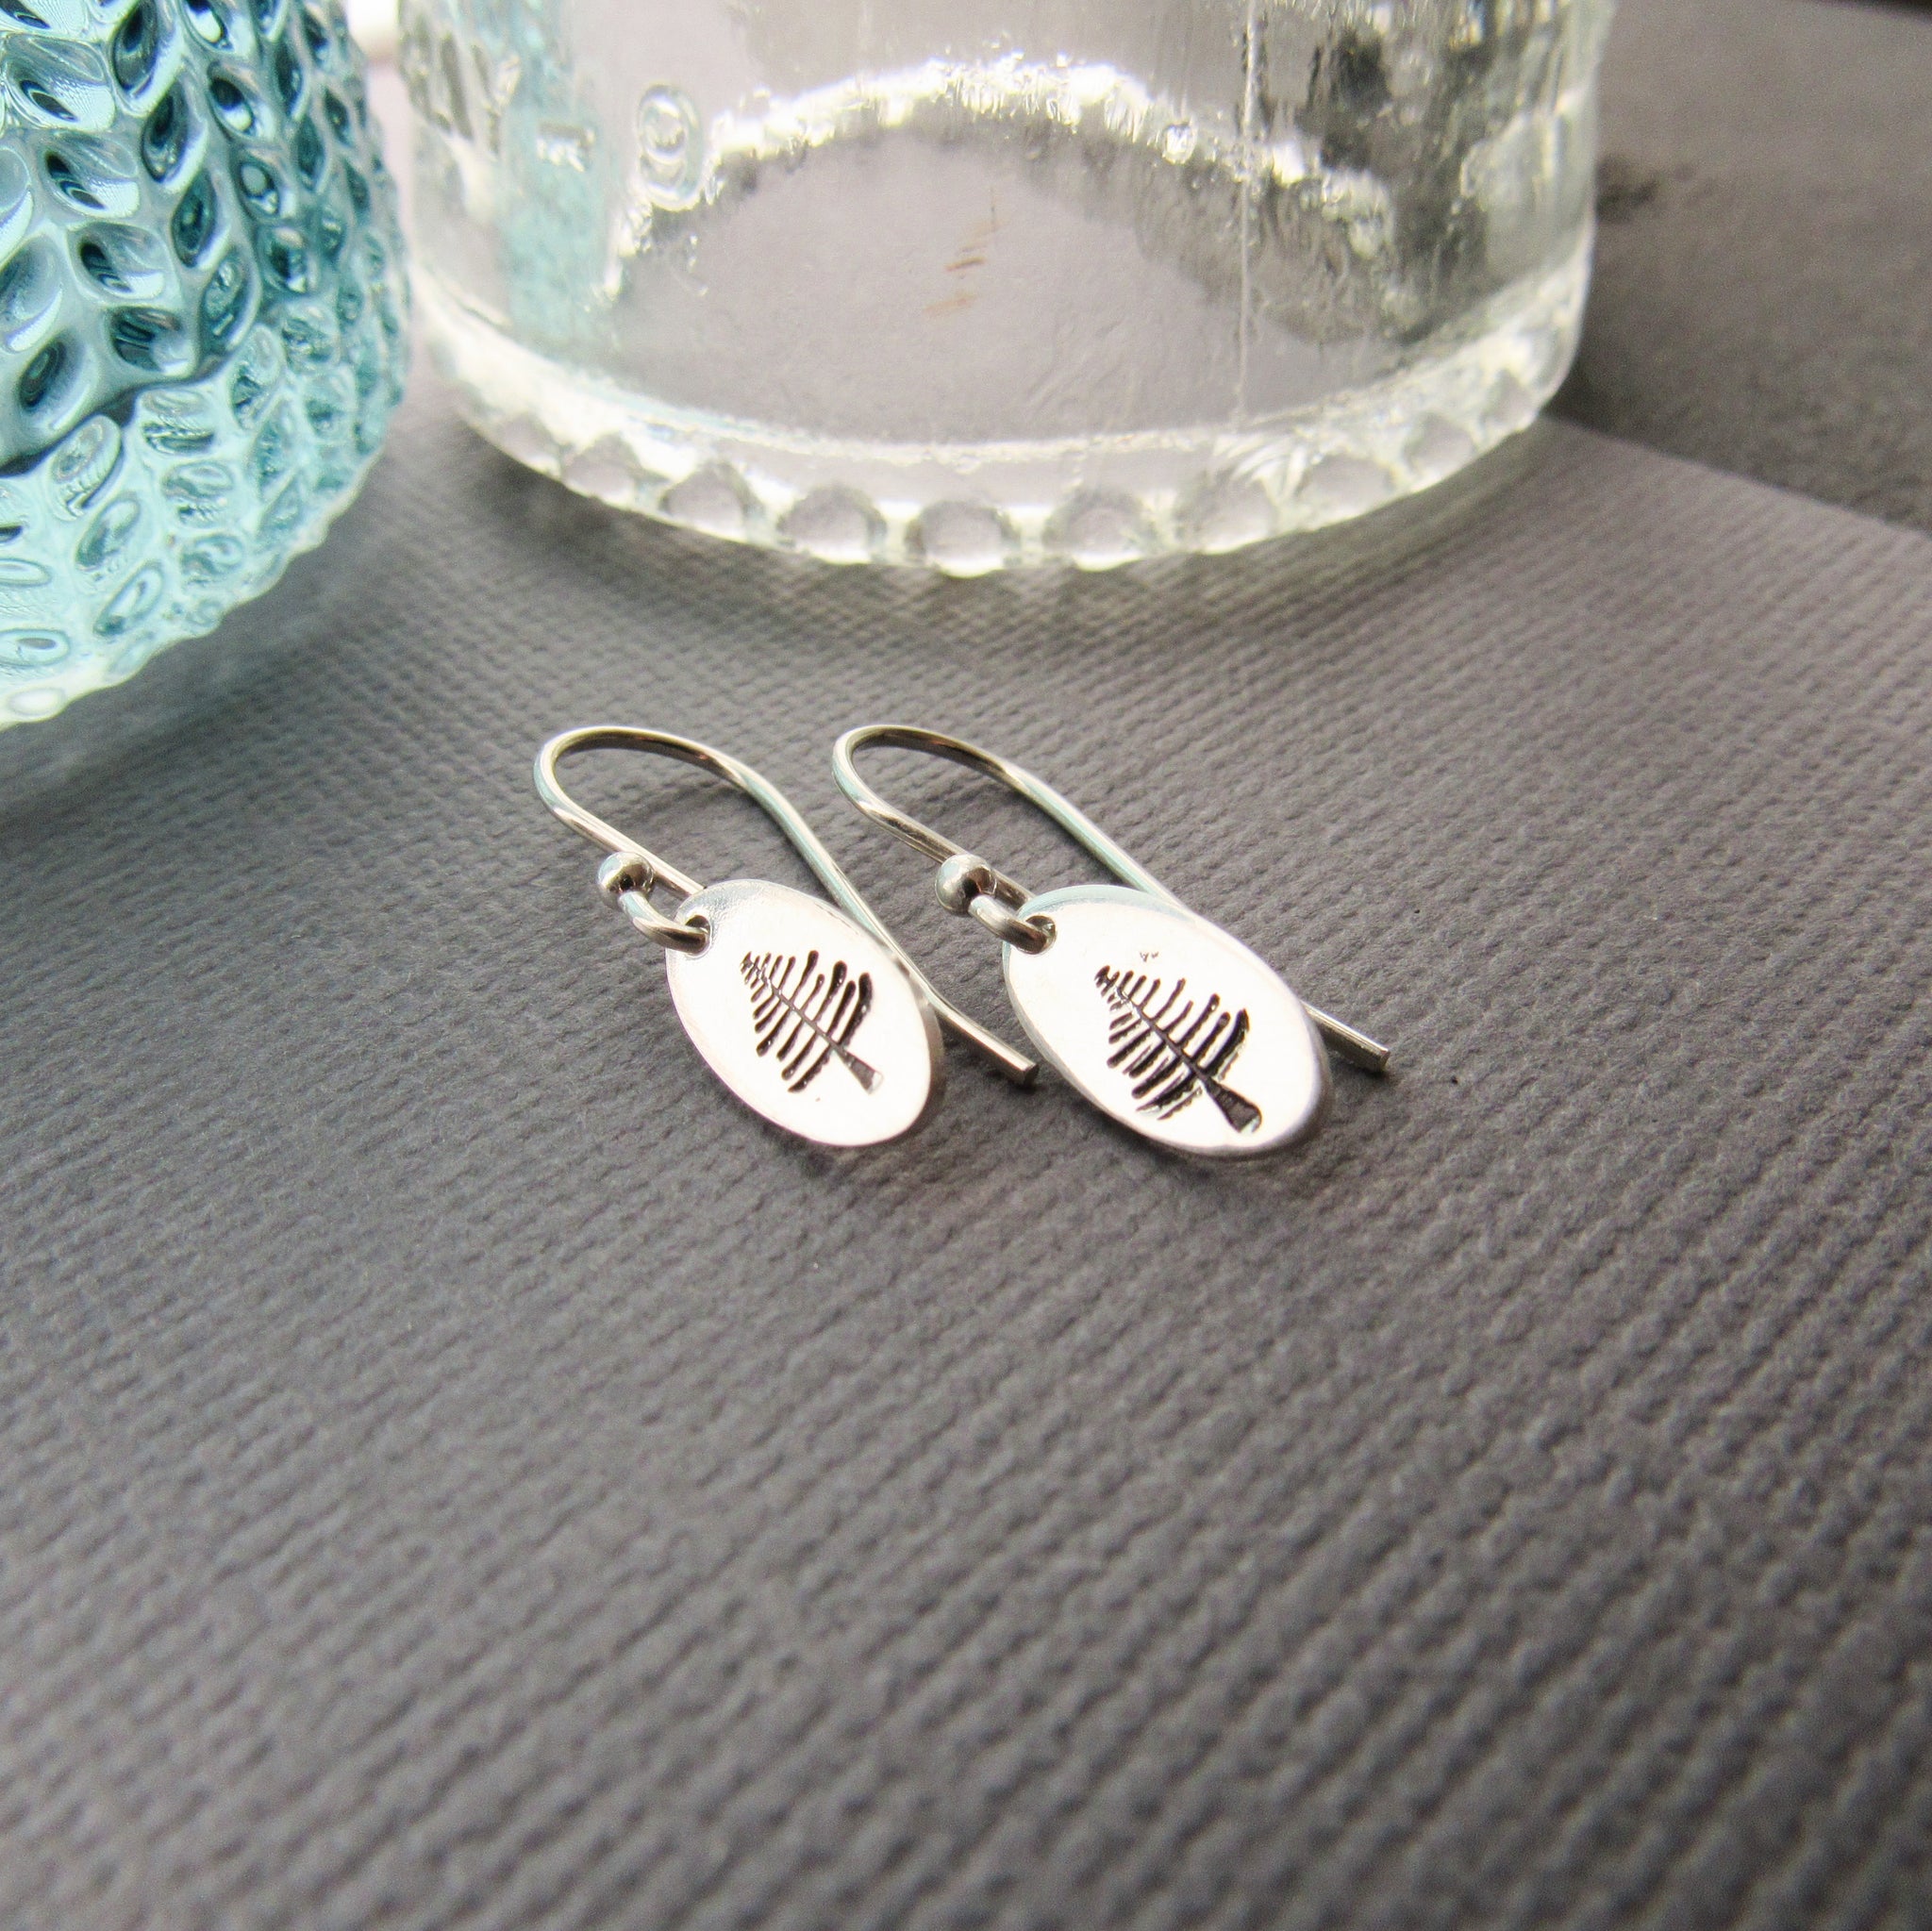 Oval Sterling Silver Stamped Evergreen Tree Earrings